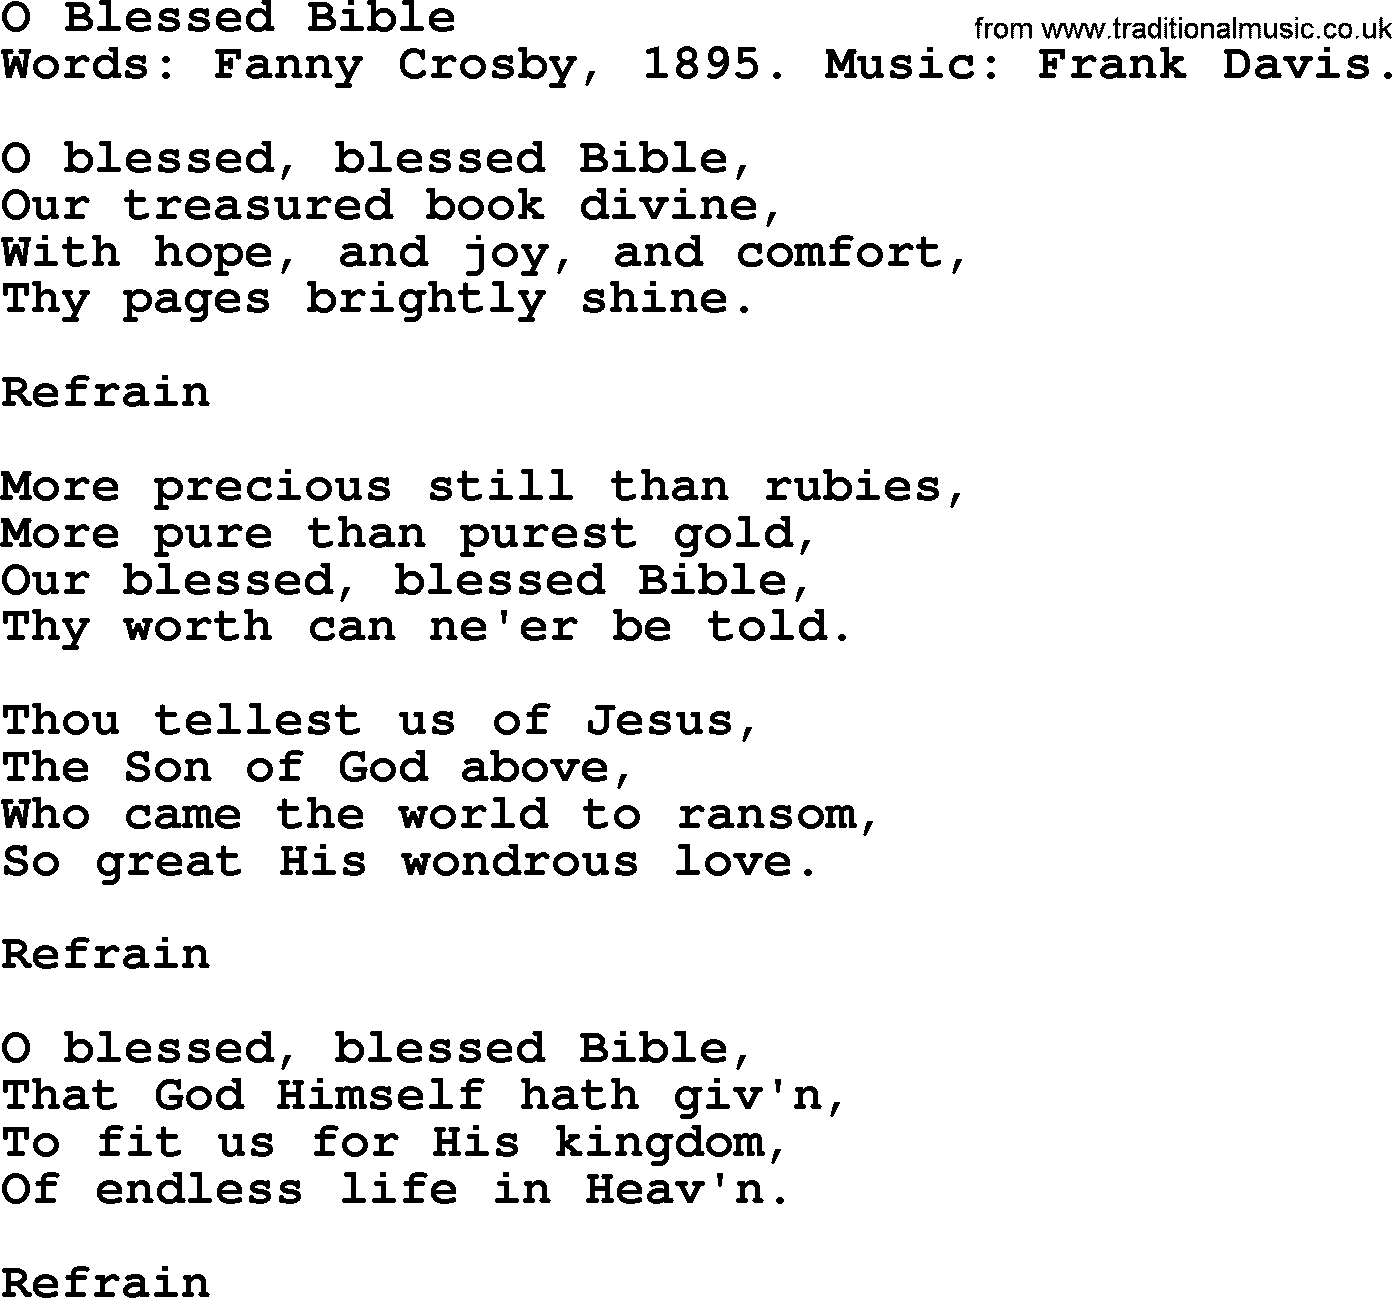 Fanny Crosby song: O Blessed Bible, lyrics